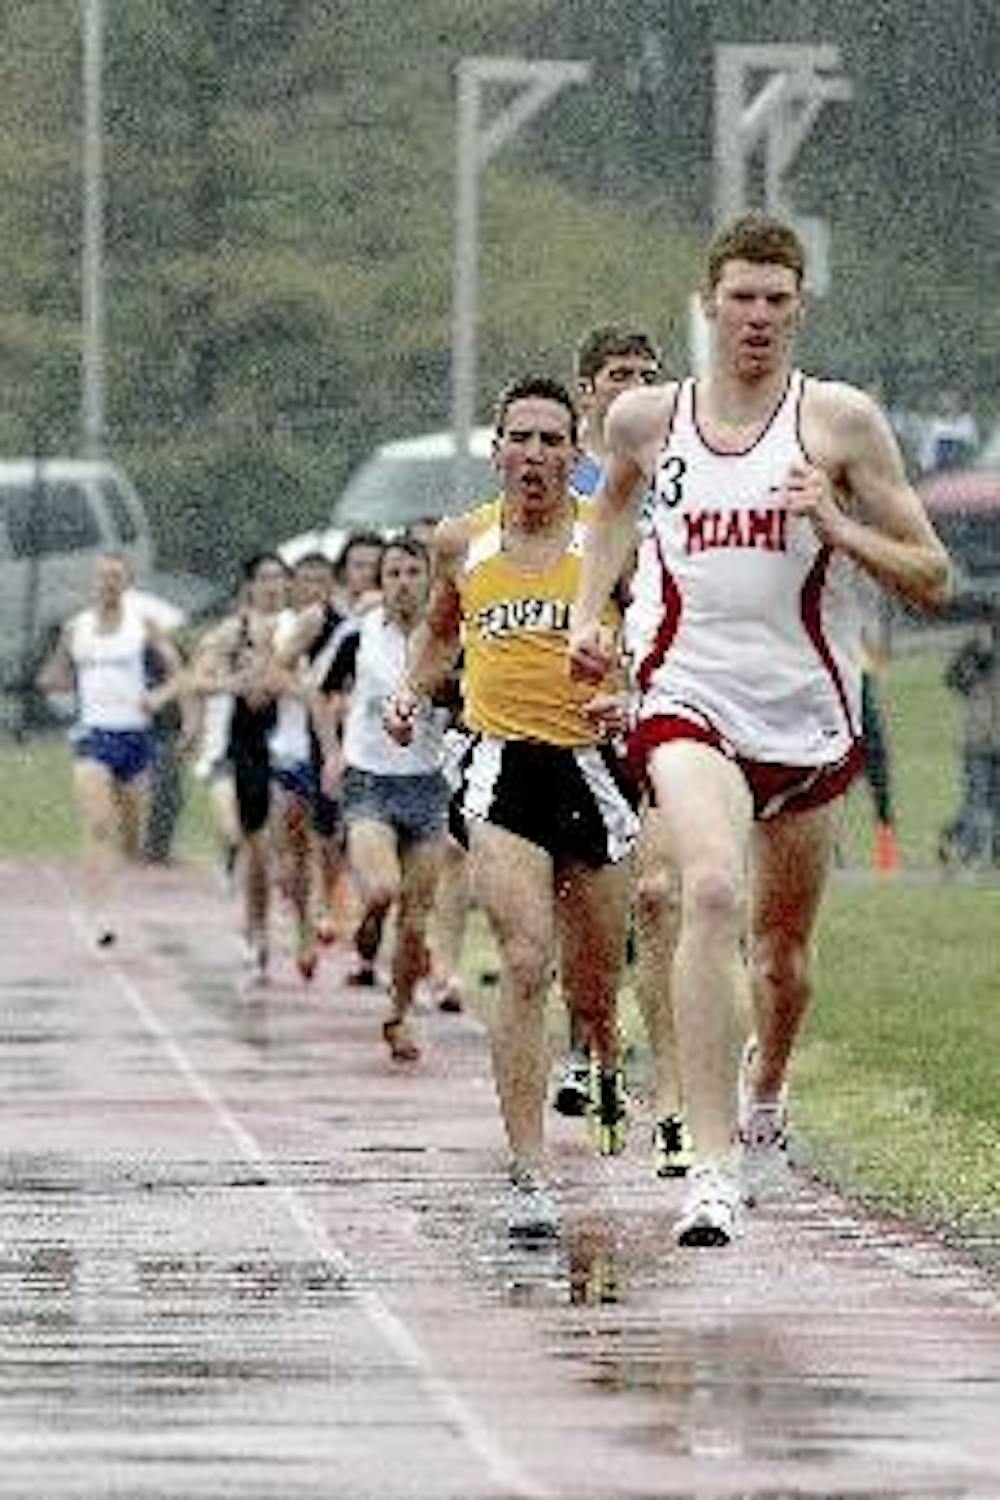 Miami sophomore Pat Sovacool leads the pack during the wet and rainy 22nd annual Miami Invitational Saturday afternoon.